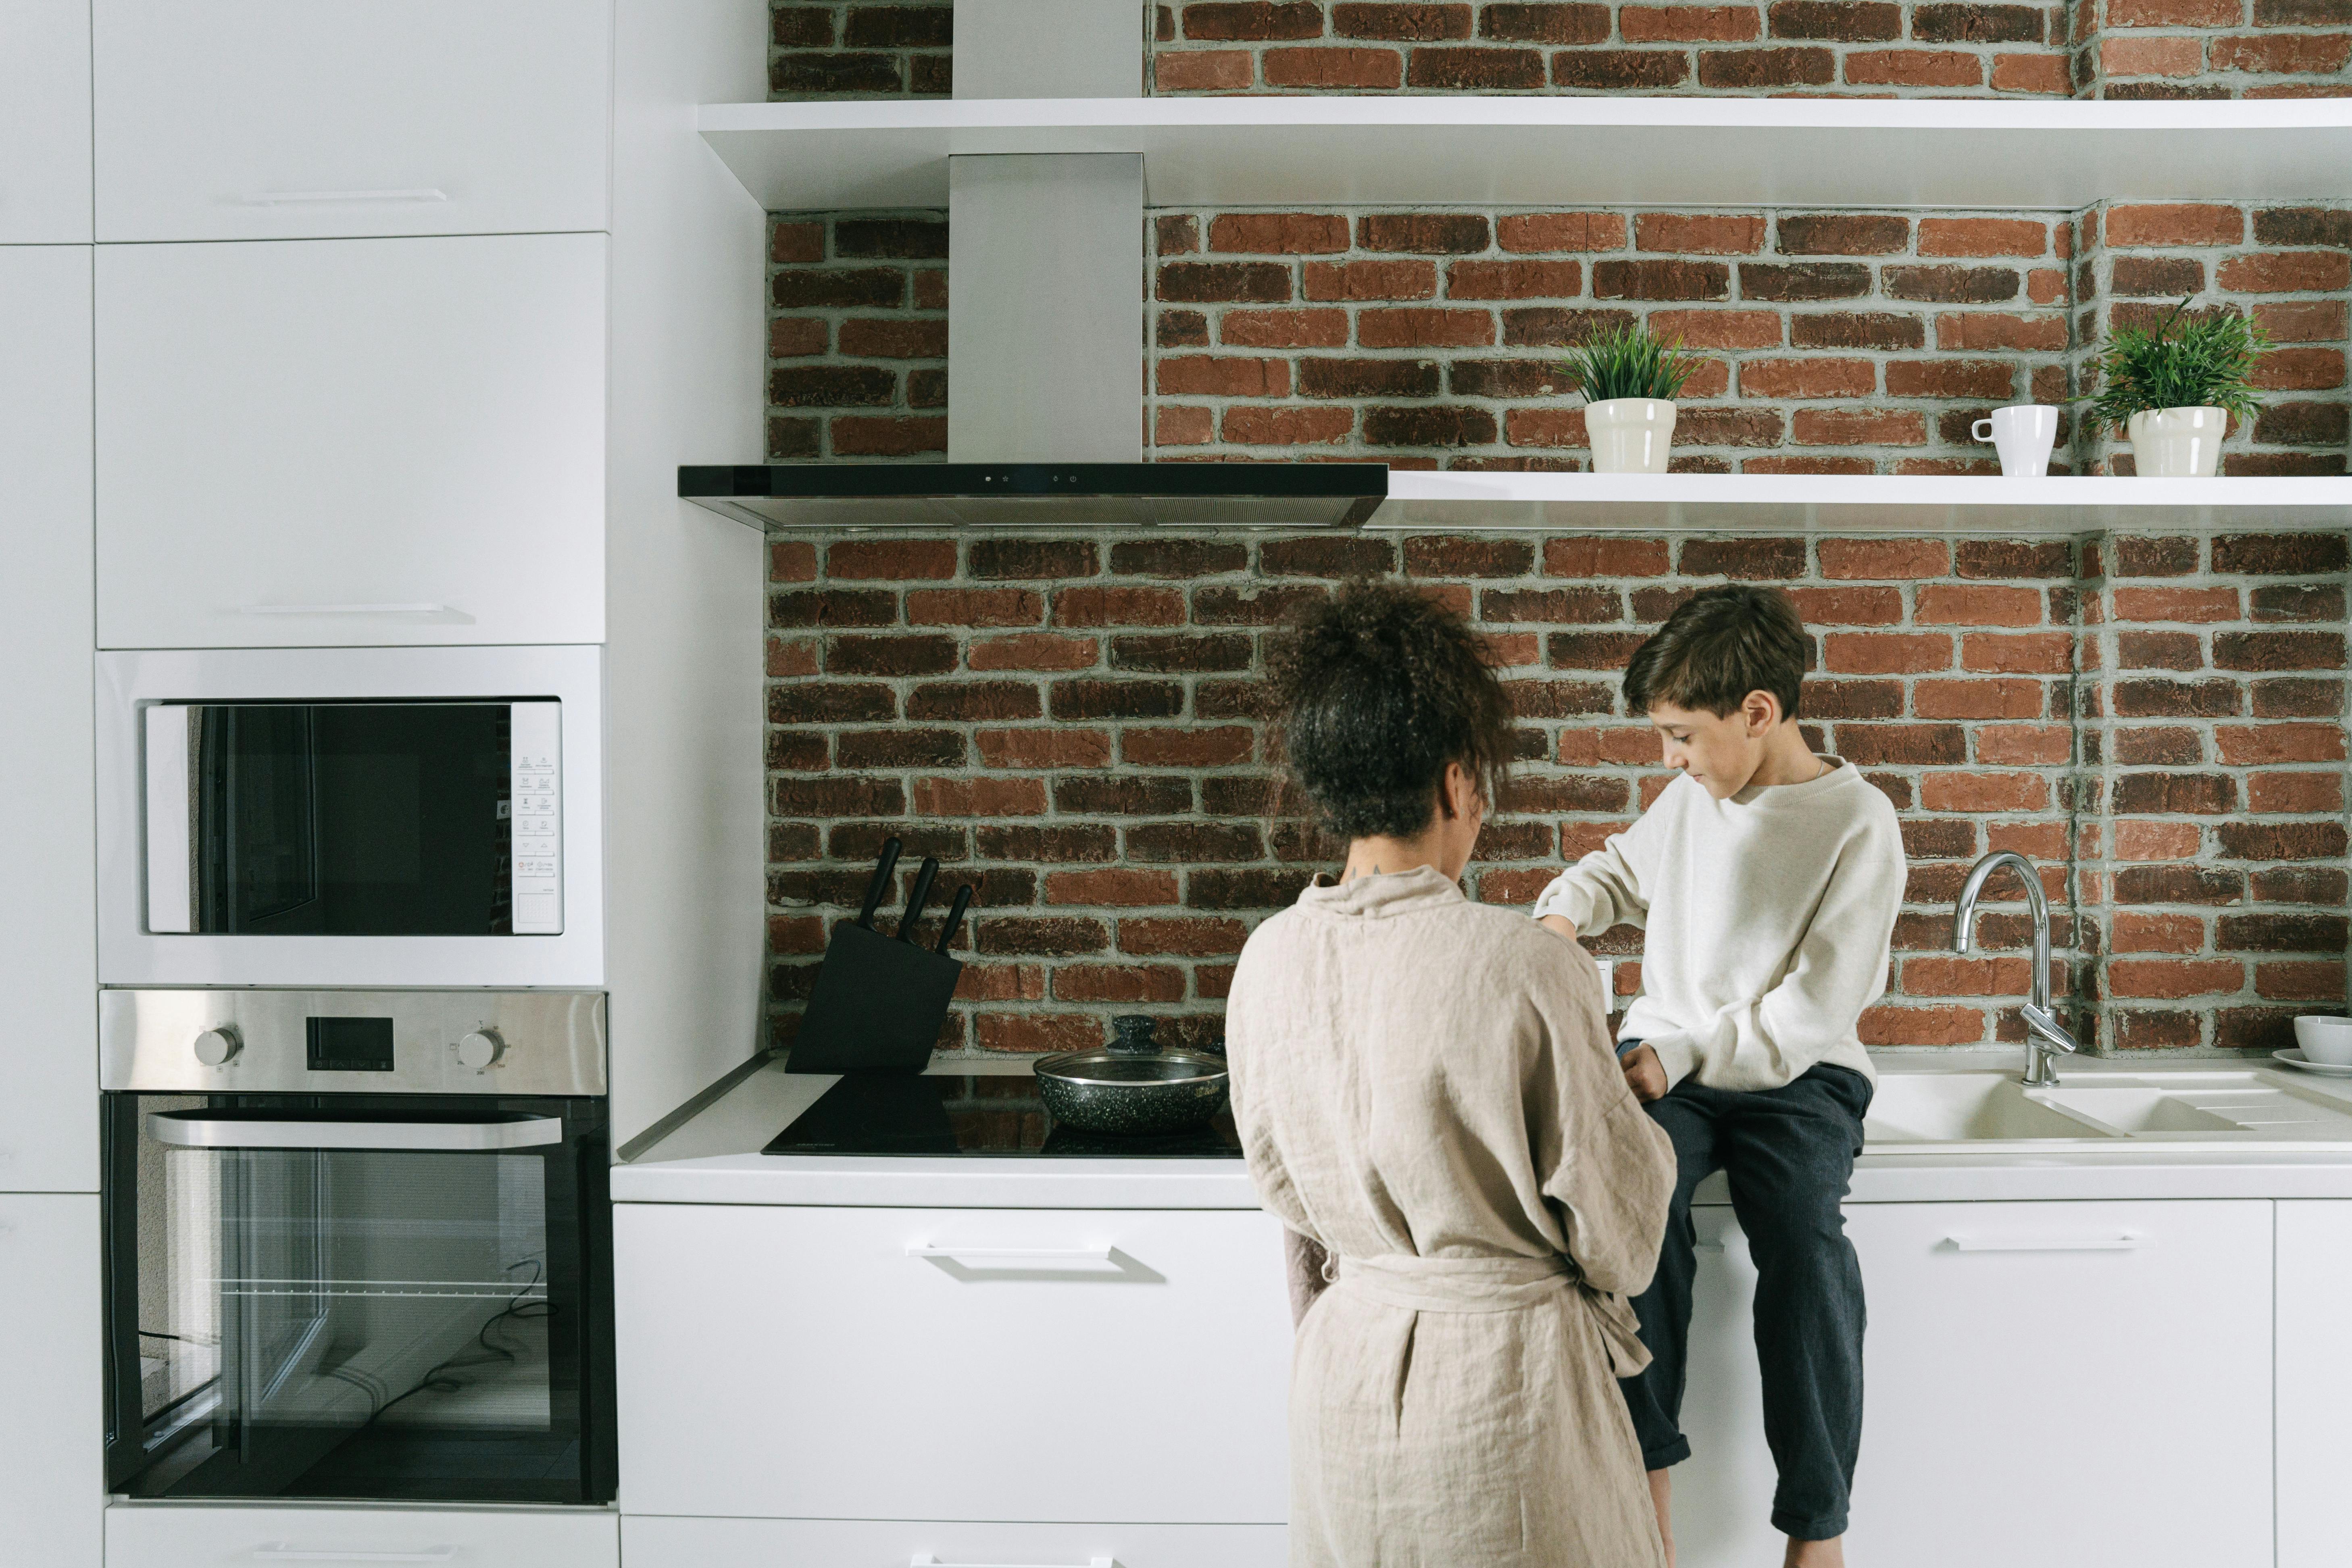 A woman and her son in the kitchen | Source: Pexels